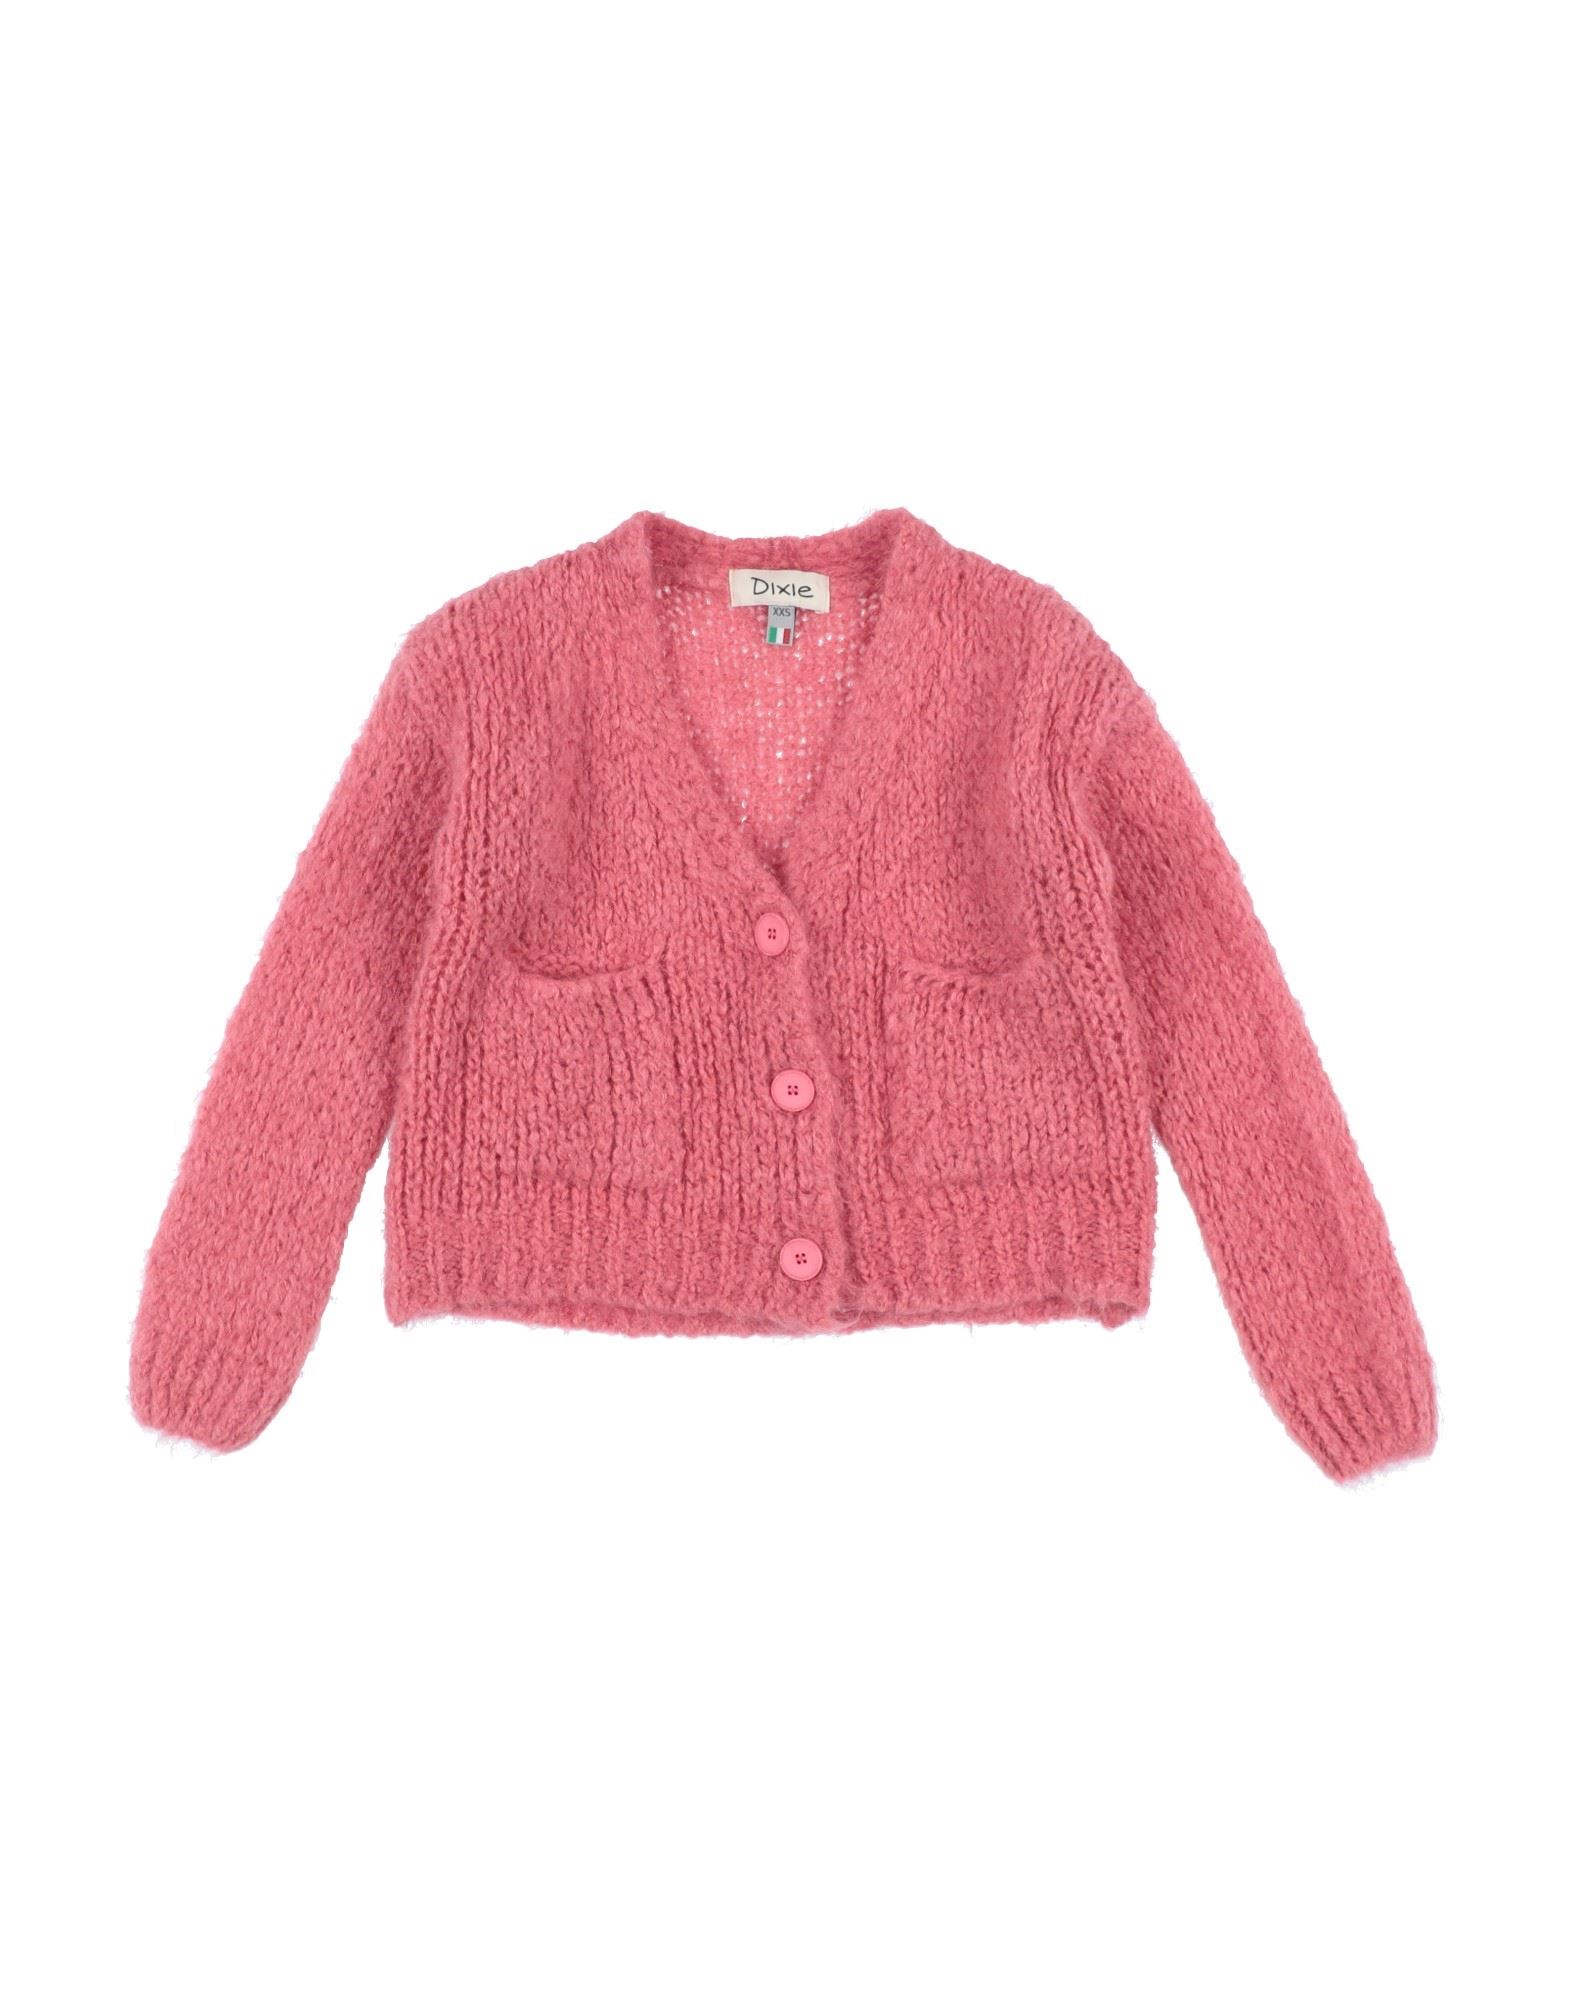 Dixie Kids' Cardigans In Pink